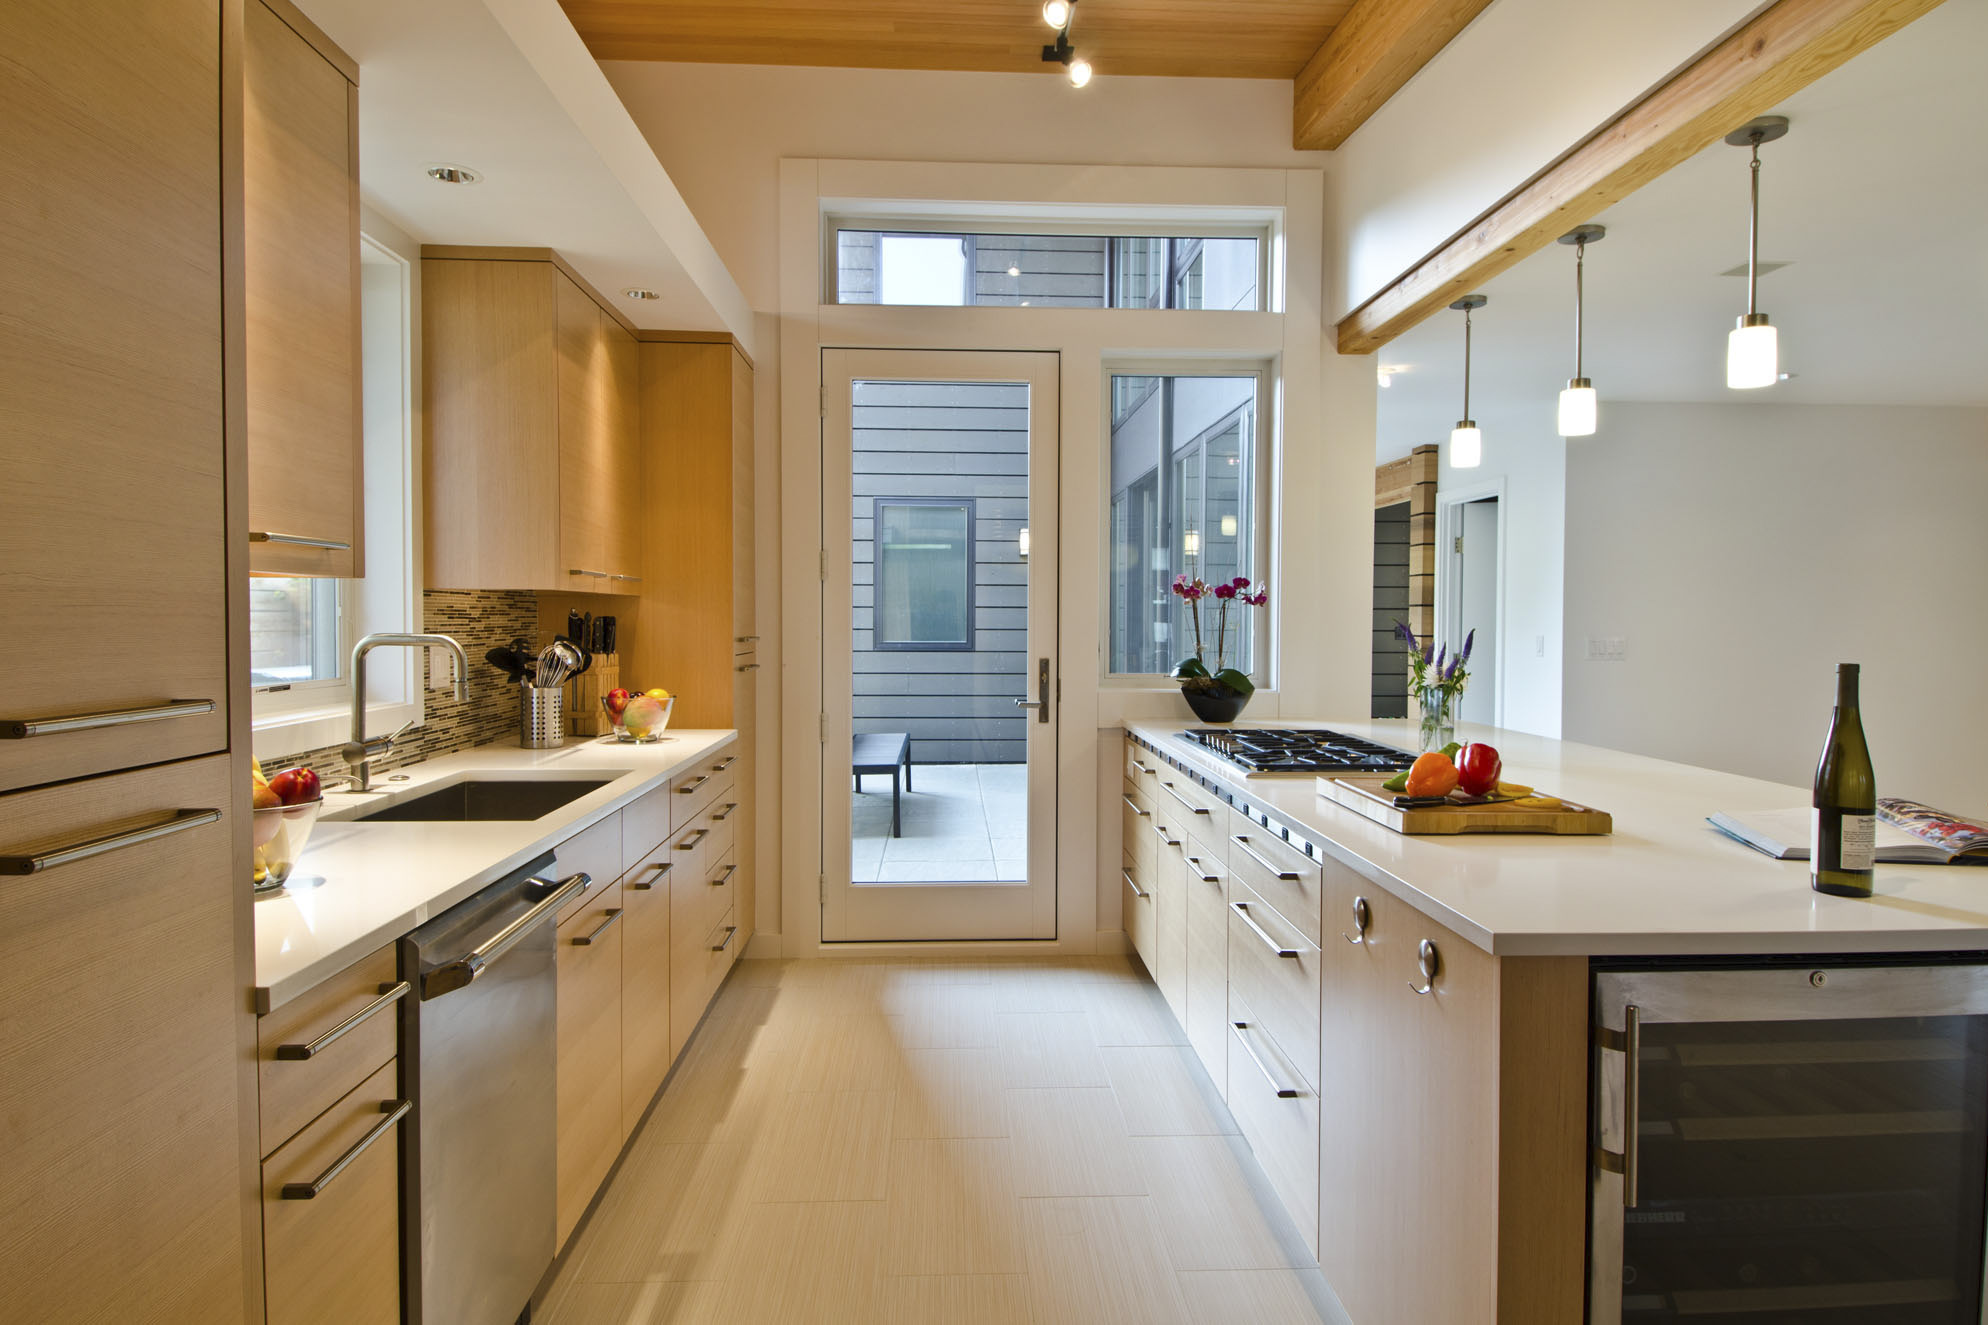 First slide - Modern home galley kitchen with indoor outdoor space and bar seating